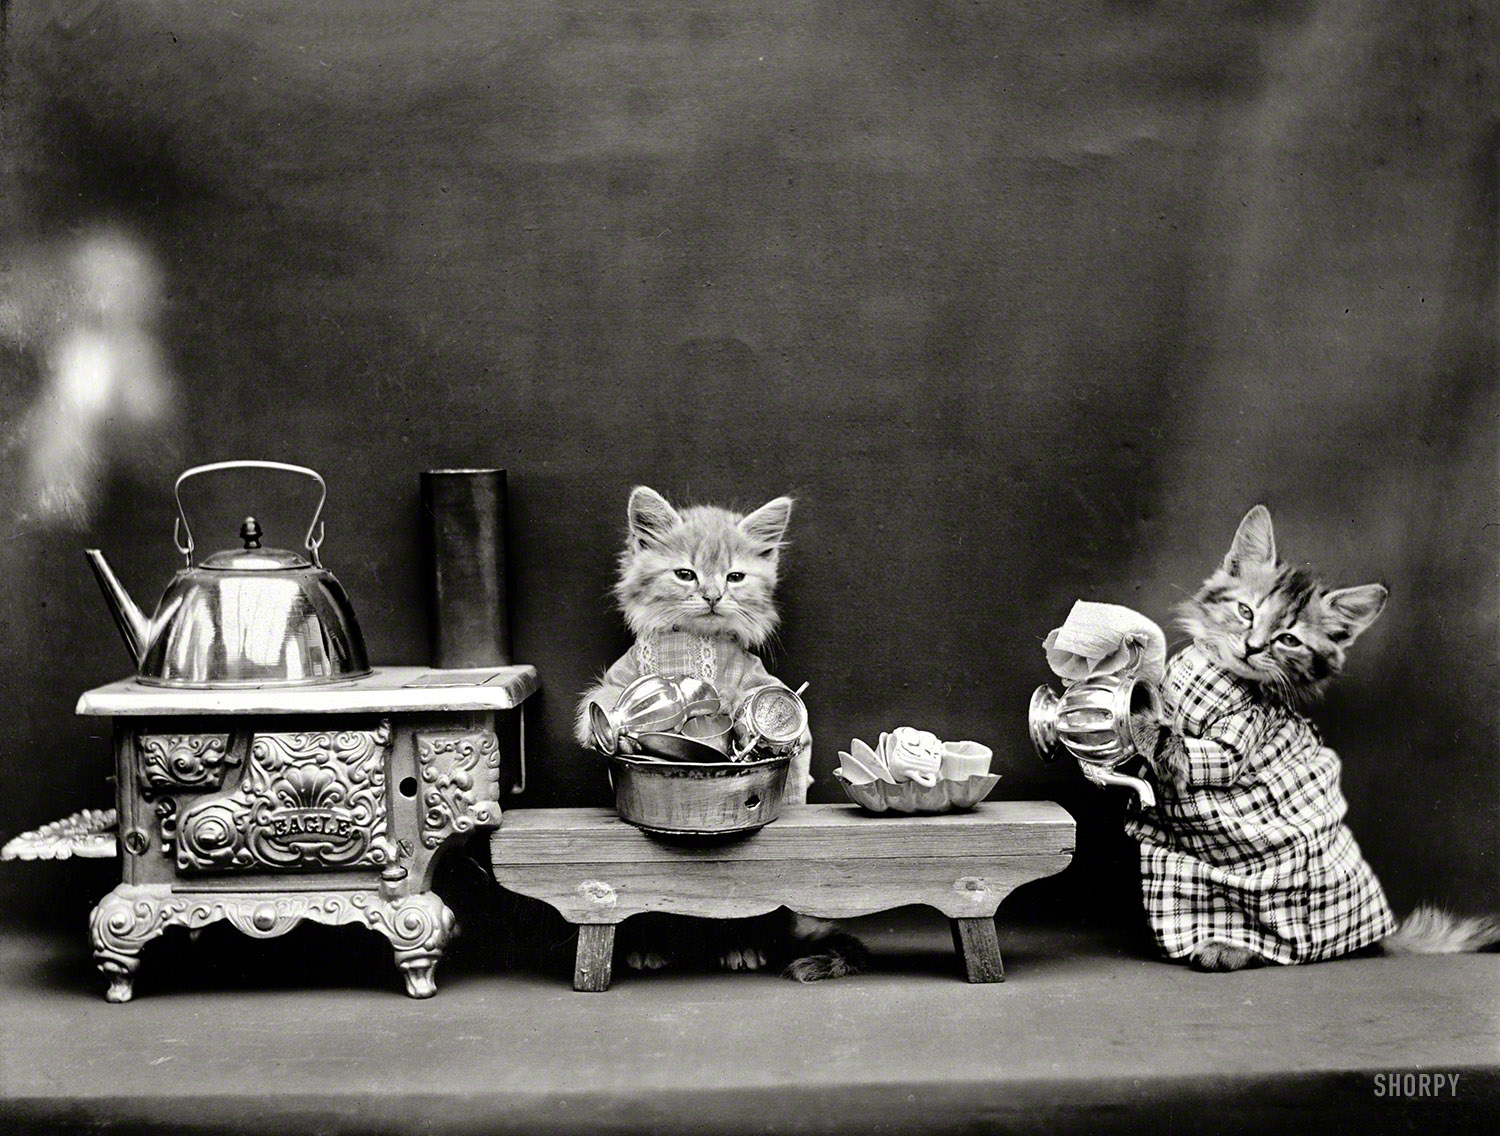 Two things you cannot escape:

 &nbsp; &nbsp; &nbsp; &nbsp; 1. The Spanish Inquisition.
 &nbsp; &nbsp; &nbsp; &nbsp; 2. The costumed cats of Harry W. Frees

1914. "Kittens in costume preparing to make tea with kettle boiling on toy stove." Photo by Harry W. Frees. View full size.